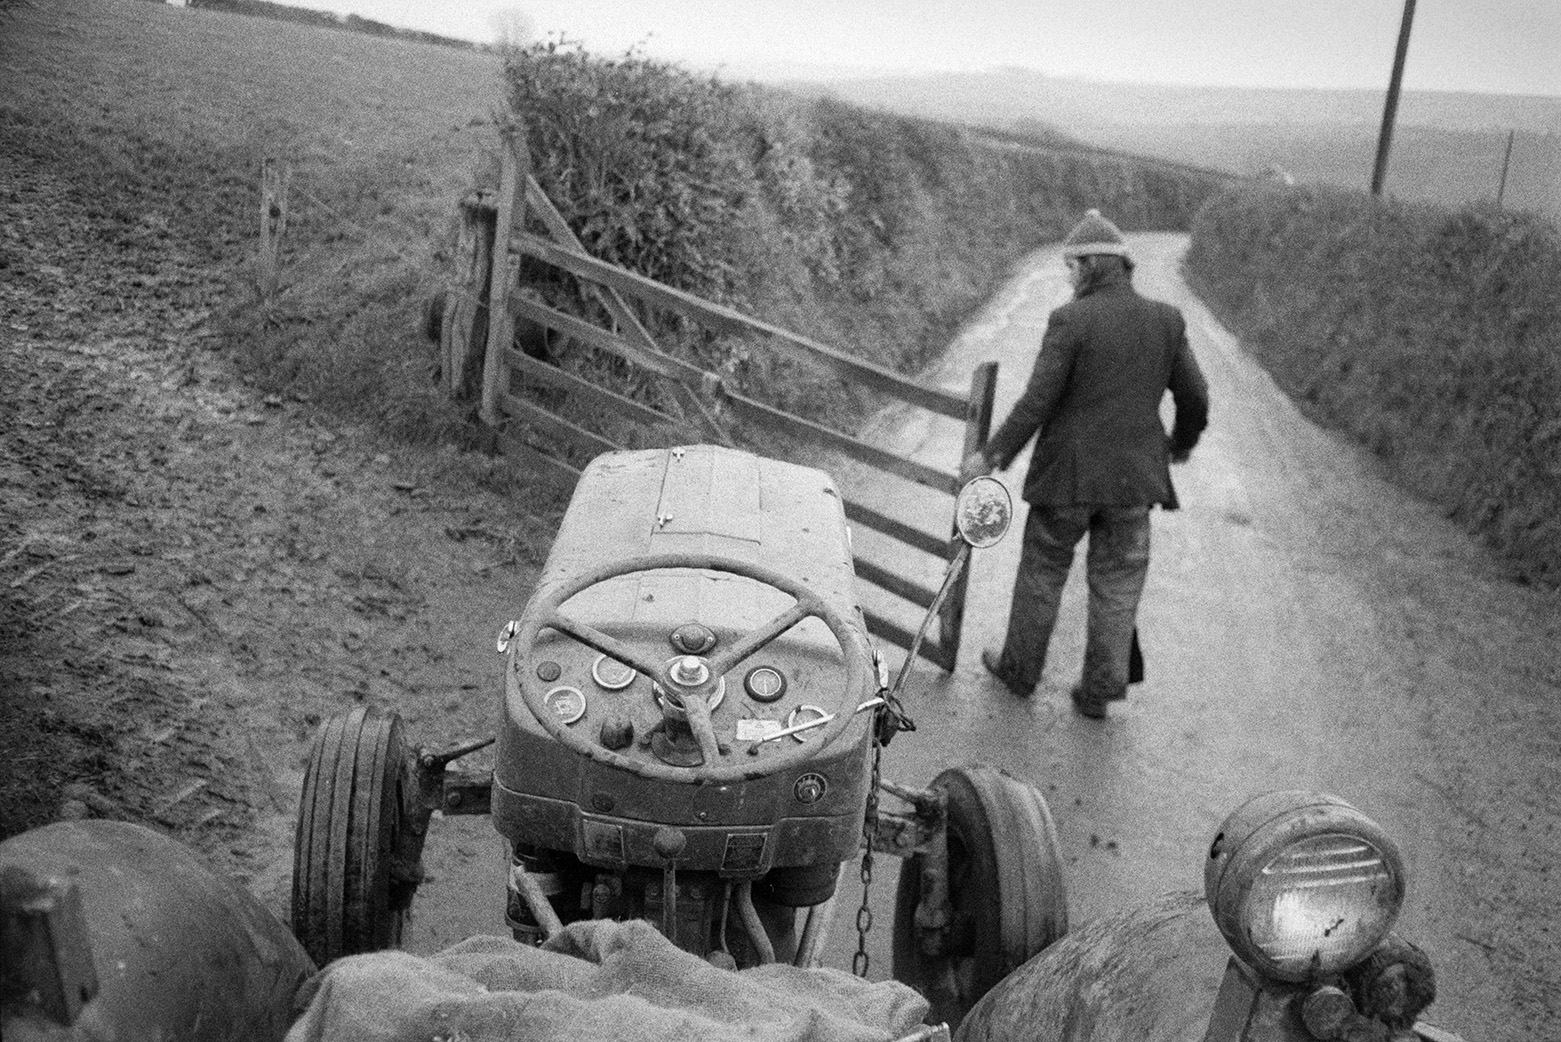 Derek Bright opening a wooden field gate for a tractor to go through, in a lane at Beaford.